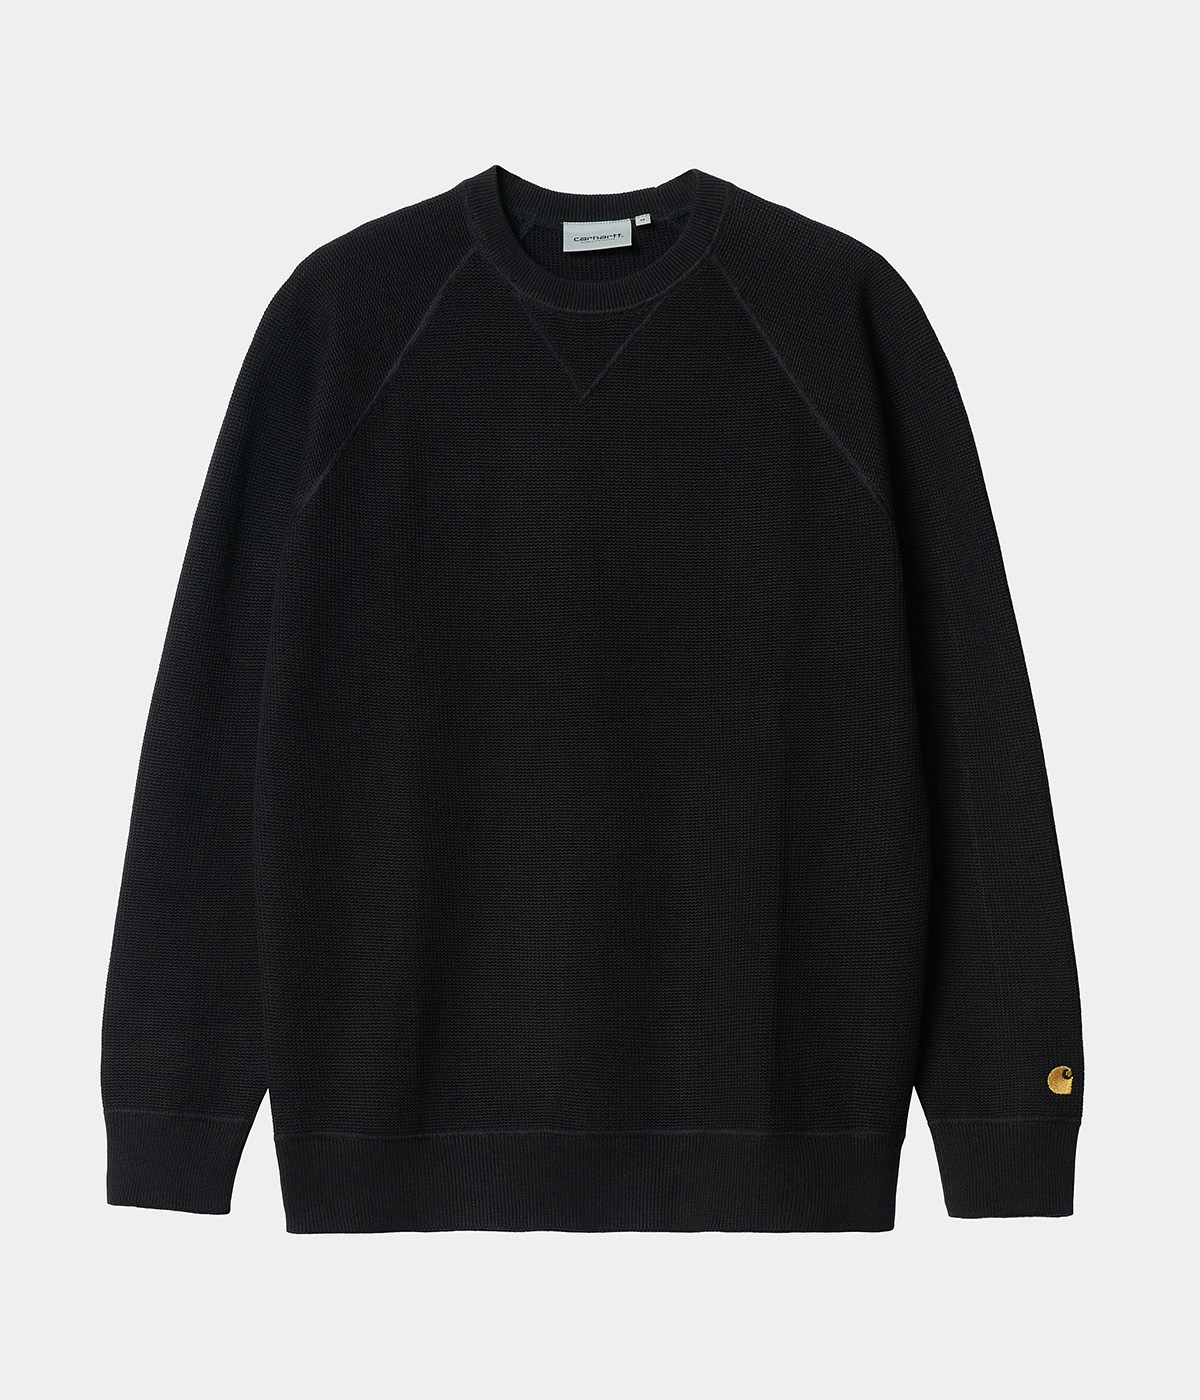 Carhartt Chase Sweater Black / Gold 1